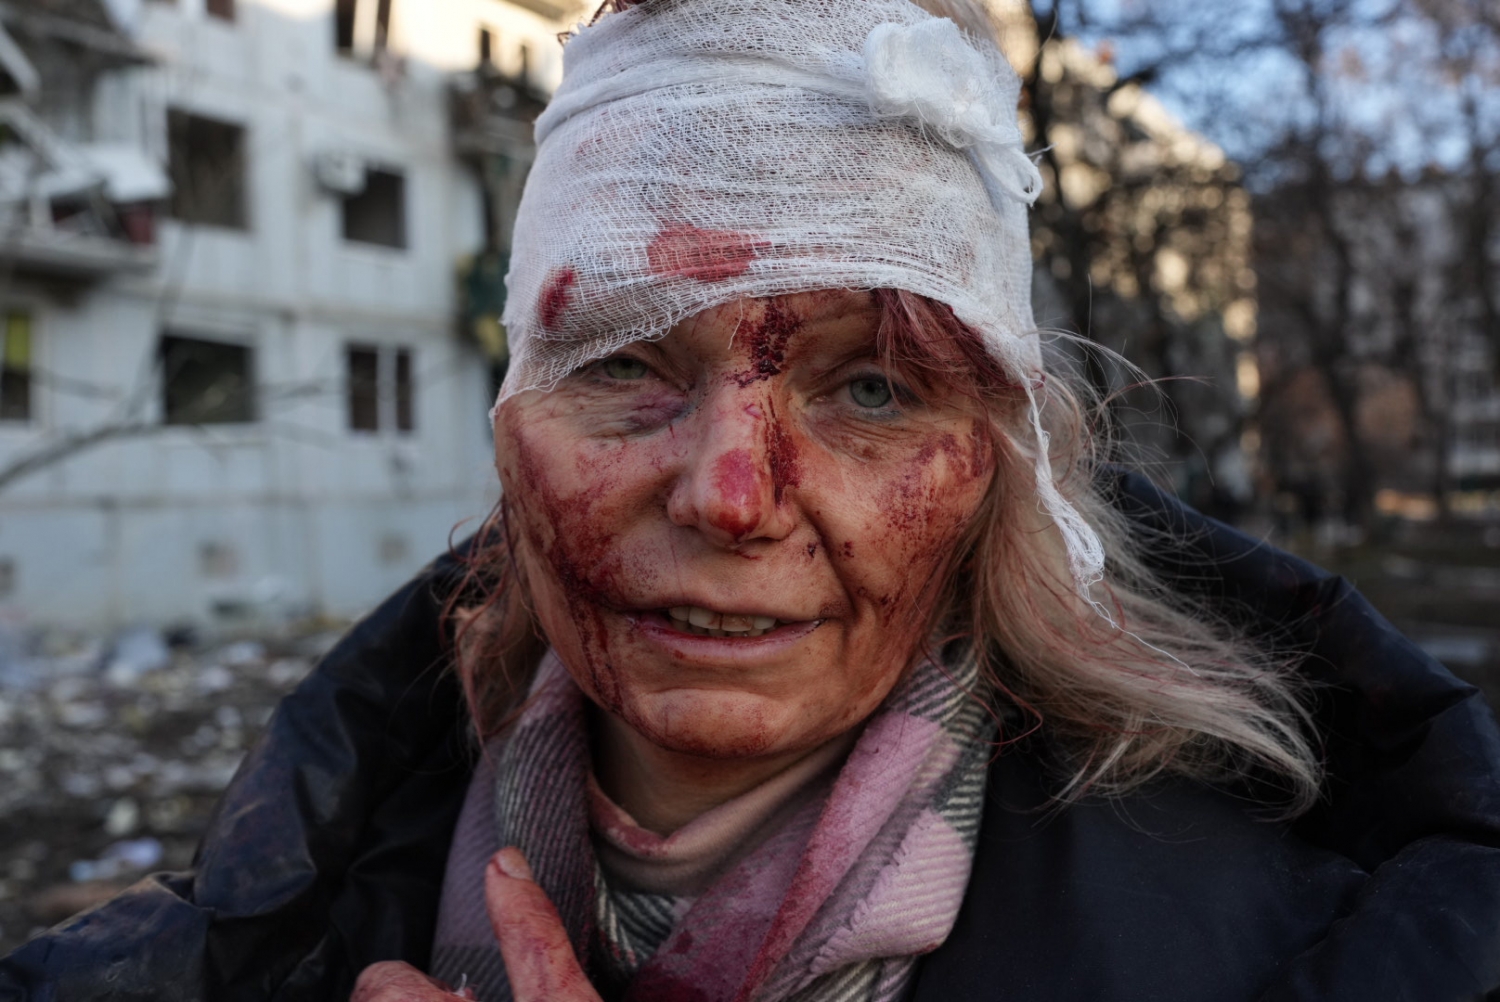 KHARKIV, UKRAINE - FEBRUARY 24: (EDITORS NOTE: Image depicts graphic content) A wounded woman is seen as airstrike damages an apartment complex outside of Kharkiv, Ukraine on February 24, 2022. (Photo by Wolfgang Schwan/Anadolu Agency via Getty Images)